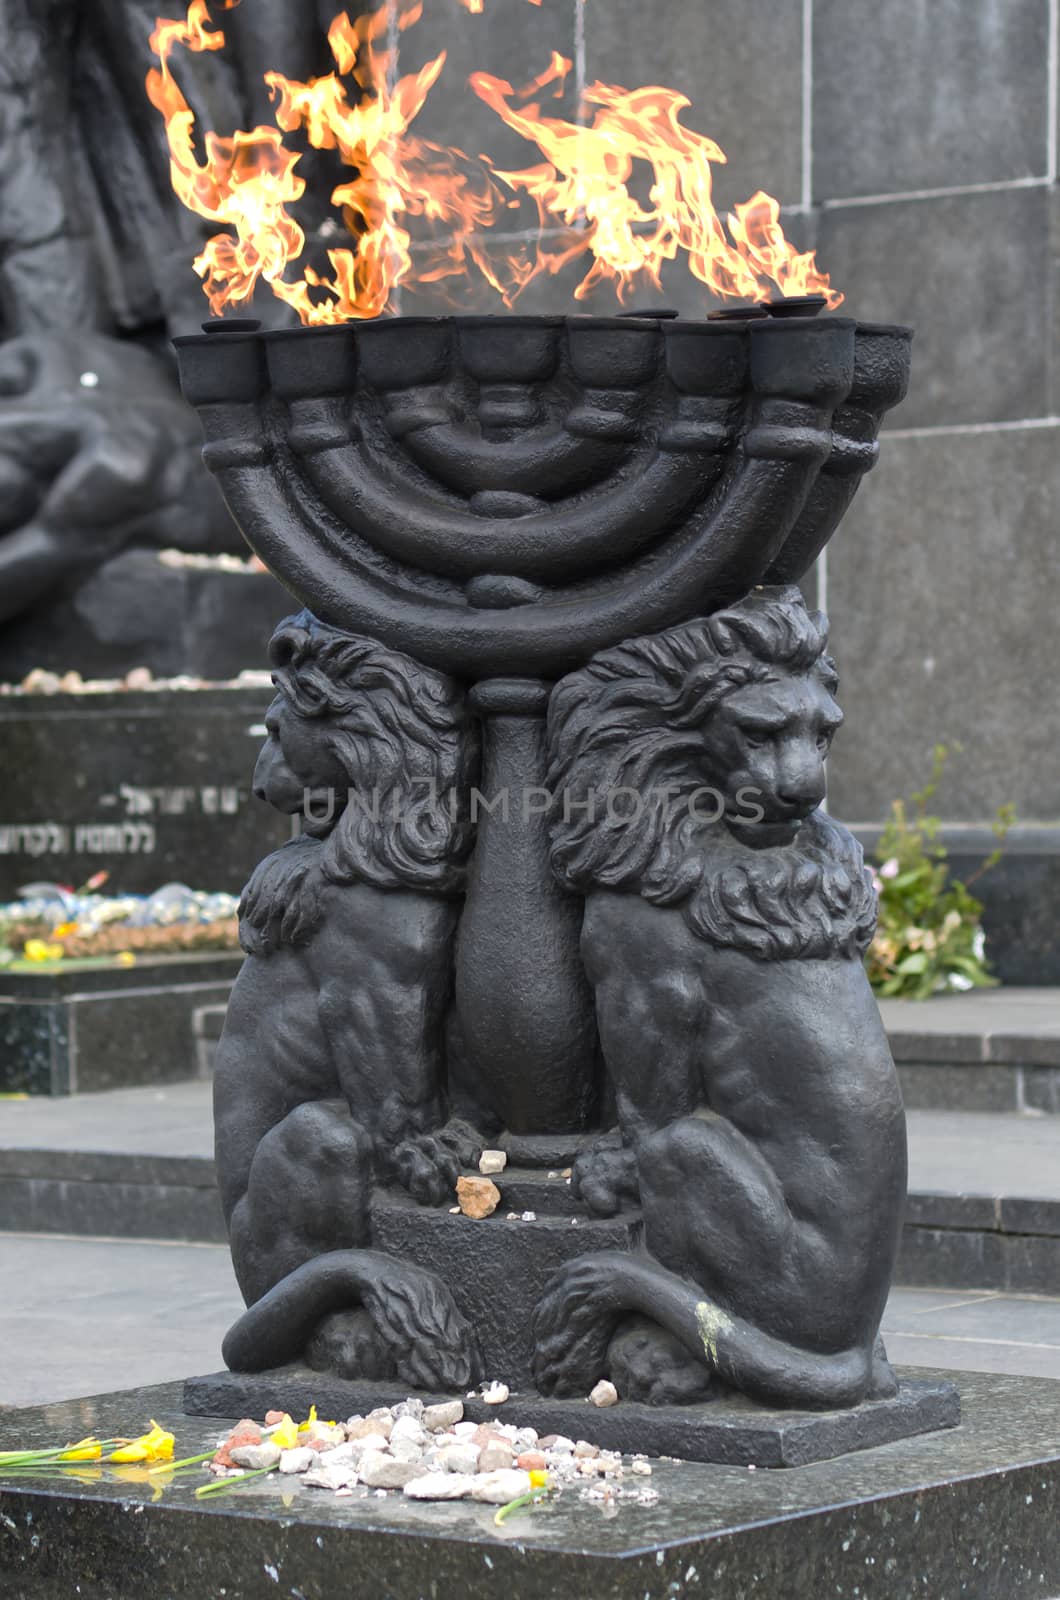 Warsaw, Poland – April 19, 2014: Celebration of the 71 anniversary of the Warsaw Ghetto Uprising. Menorah with burning flame.